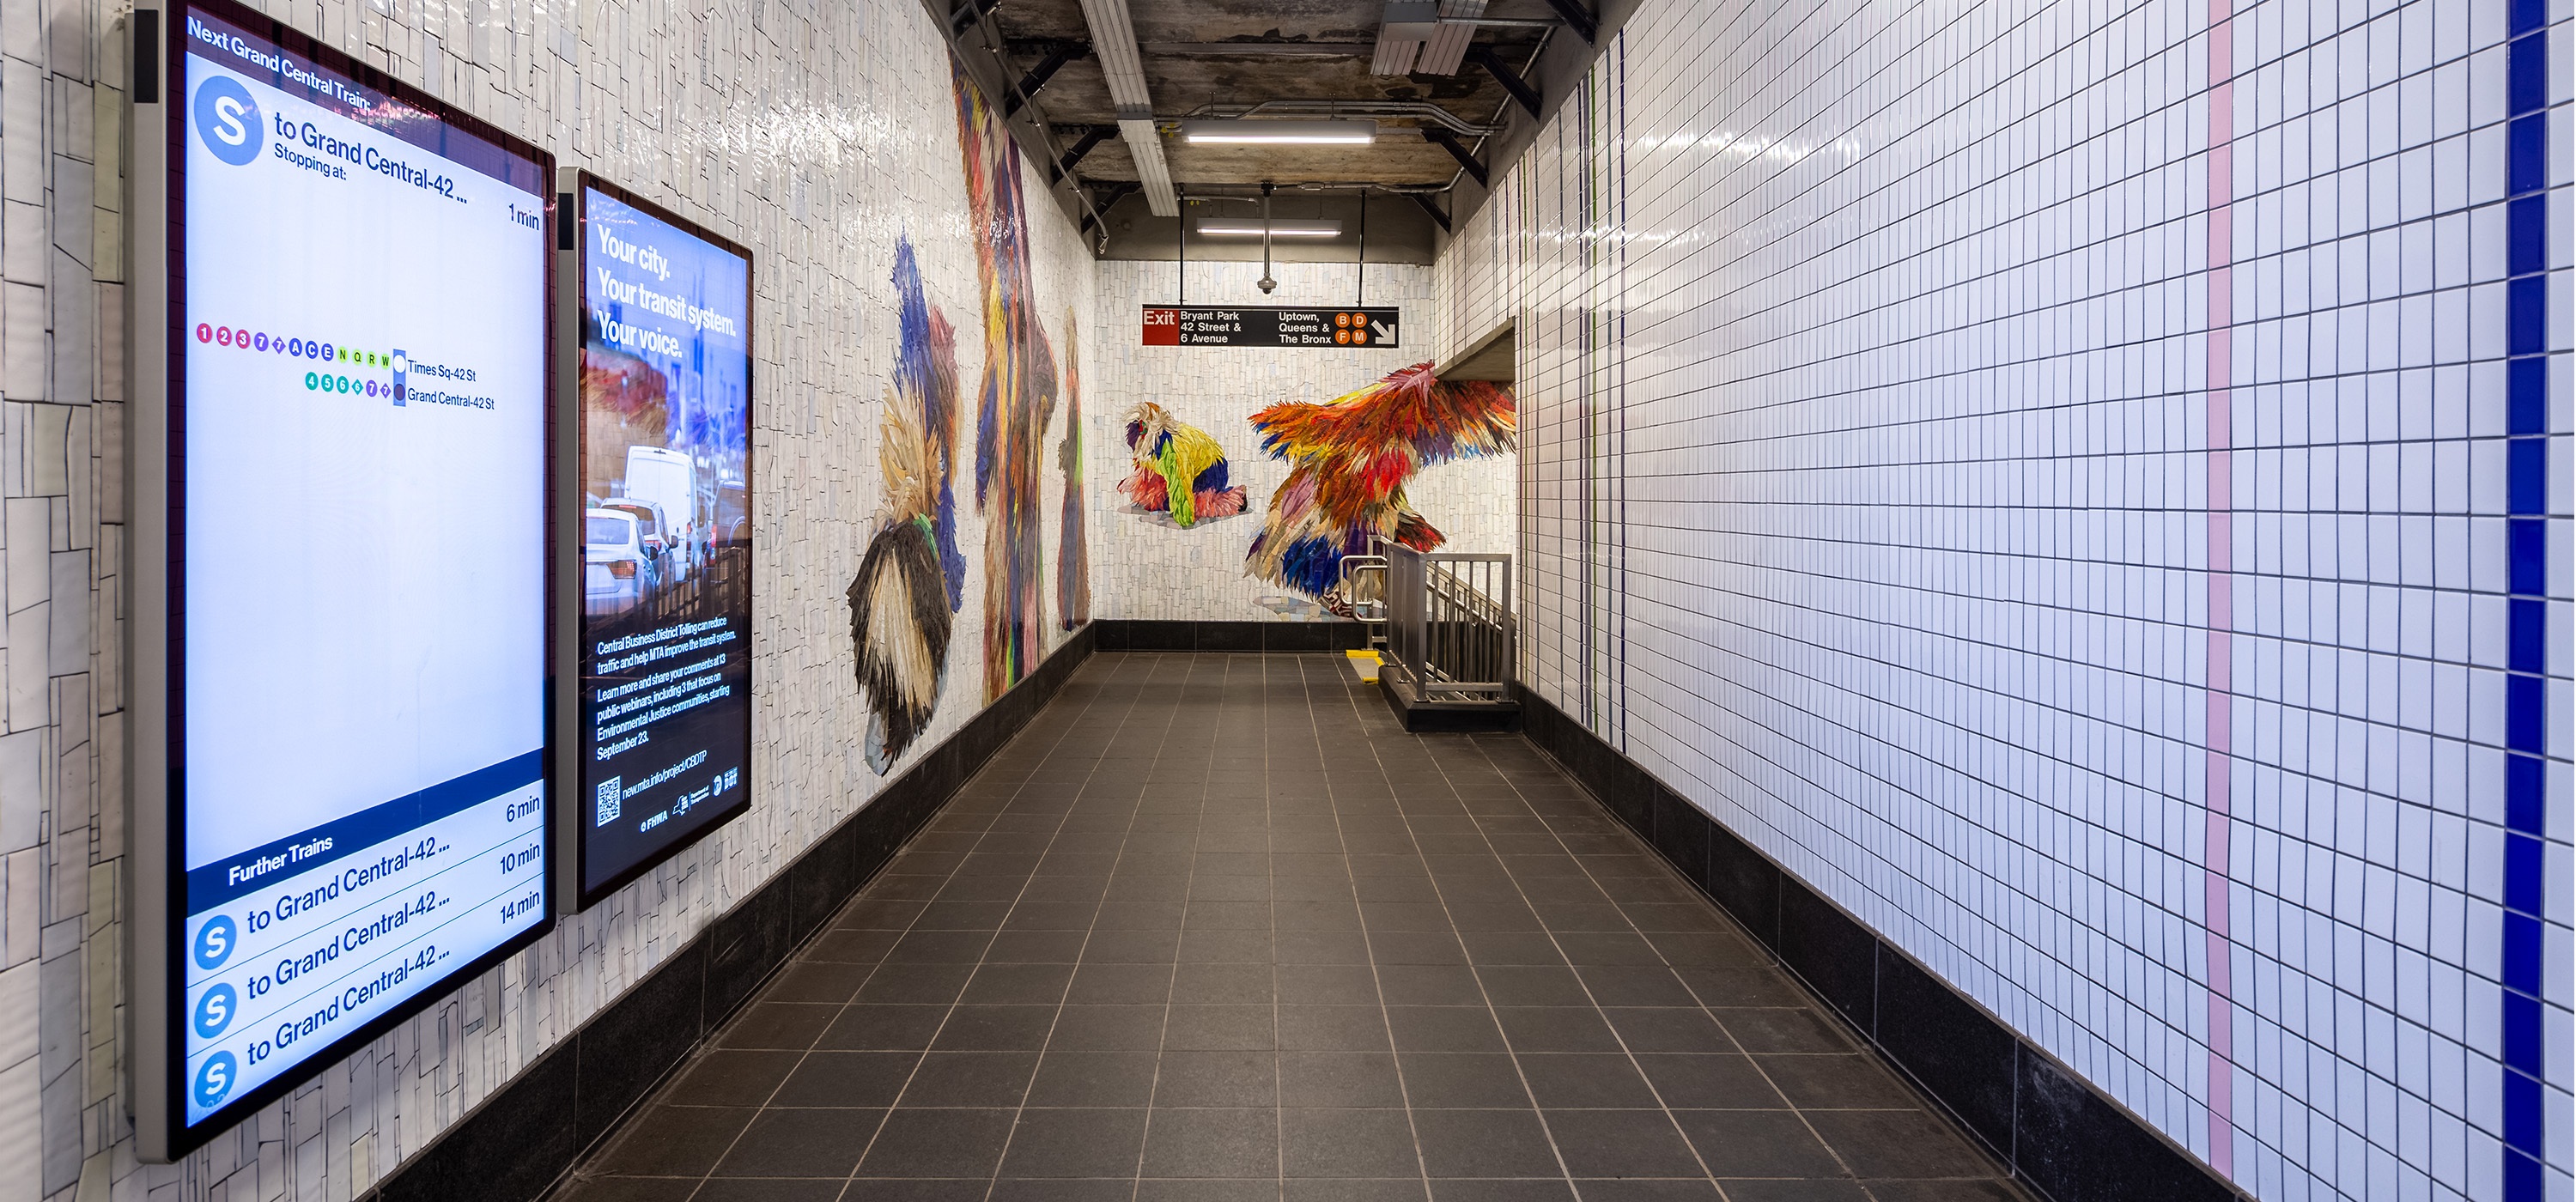 42nd Street Connector with mosaic tiles and screens